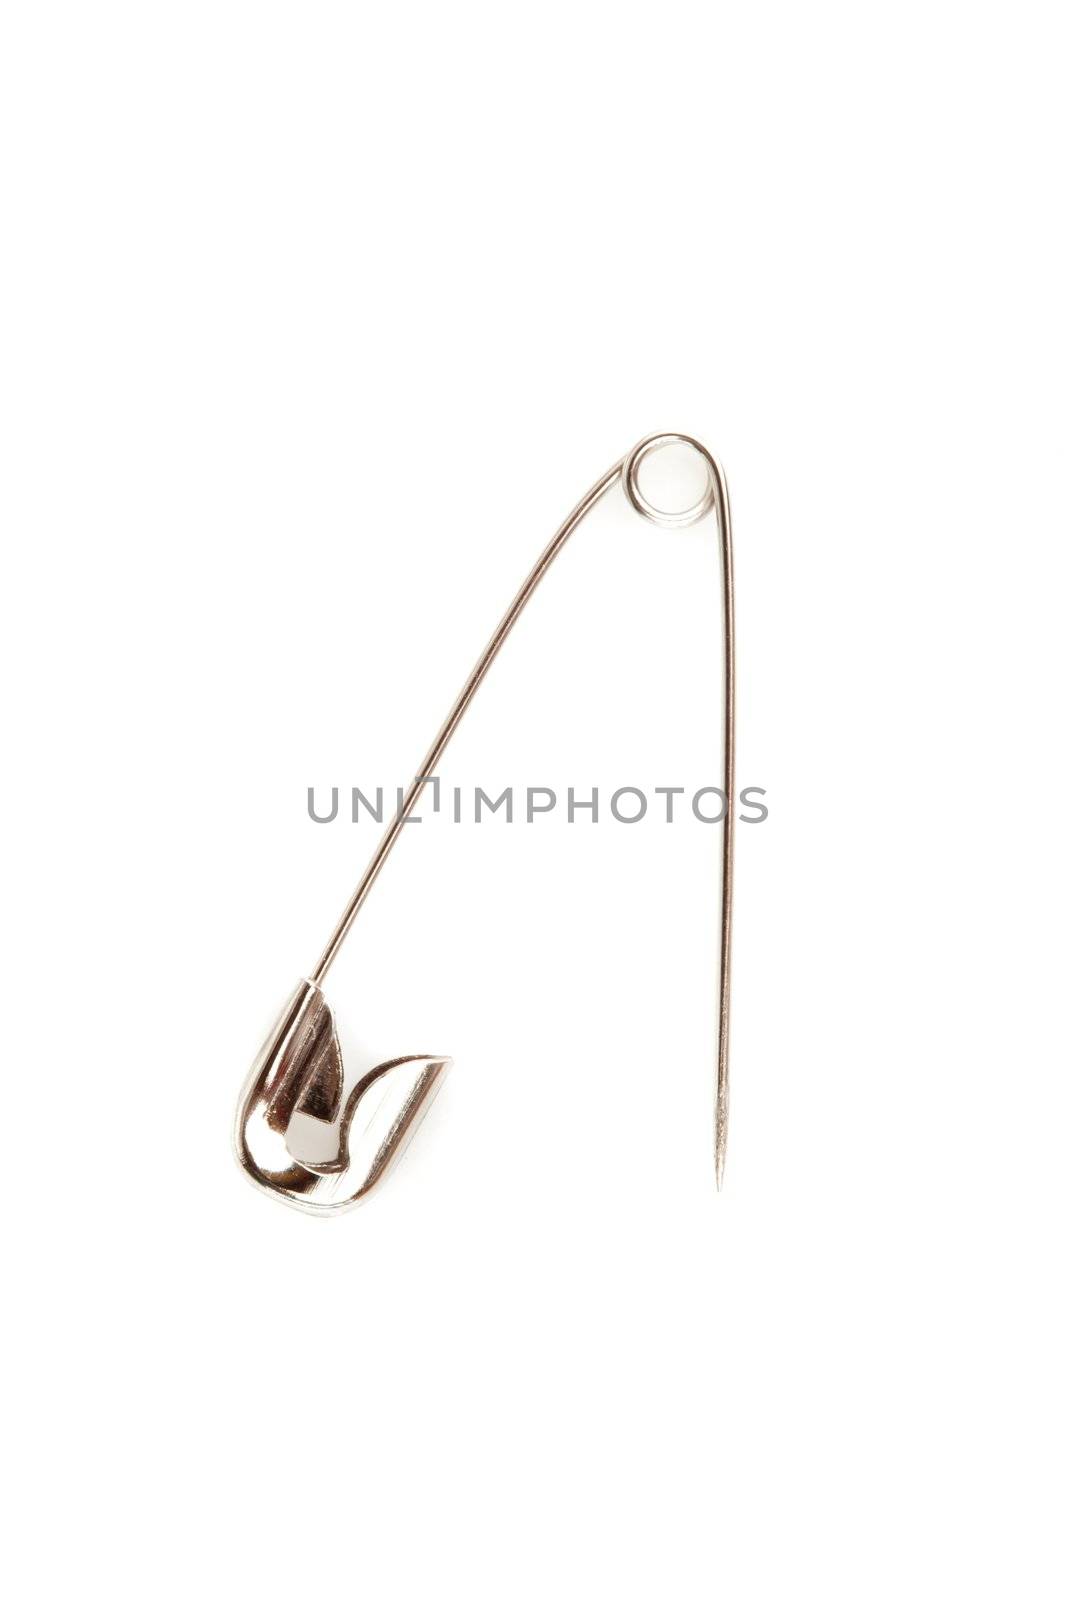 Close up of a safety pin opening against a white background